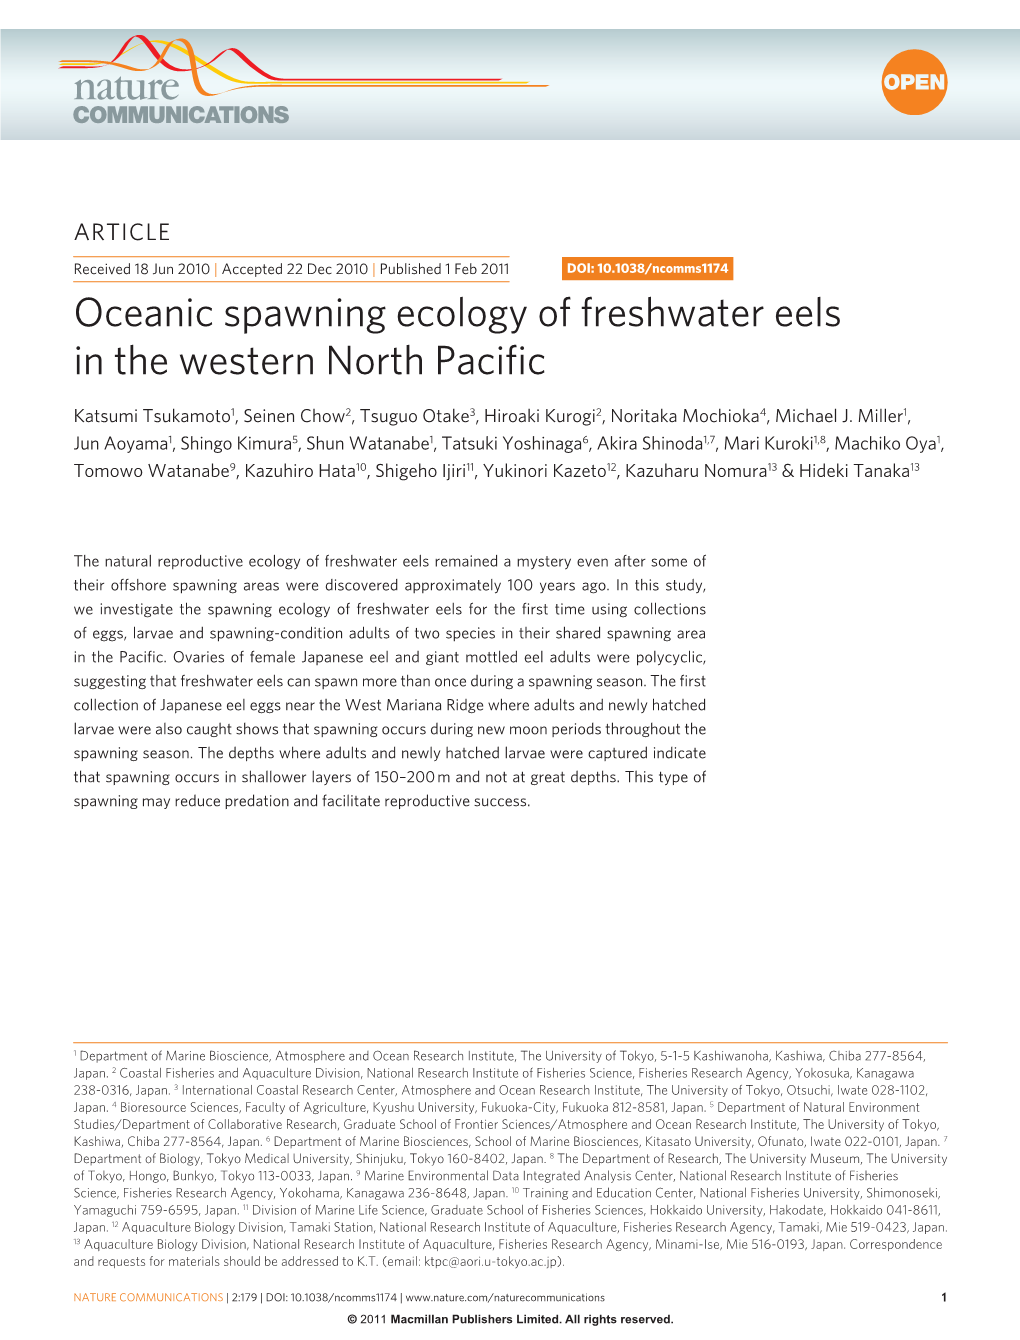 Oceanic Spawning Ecology of Freshwater Eels in the Western North Pacific